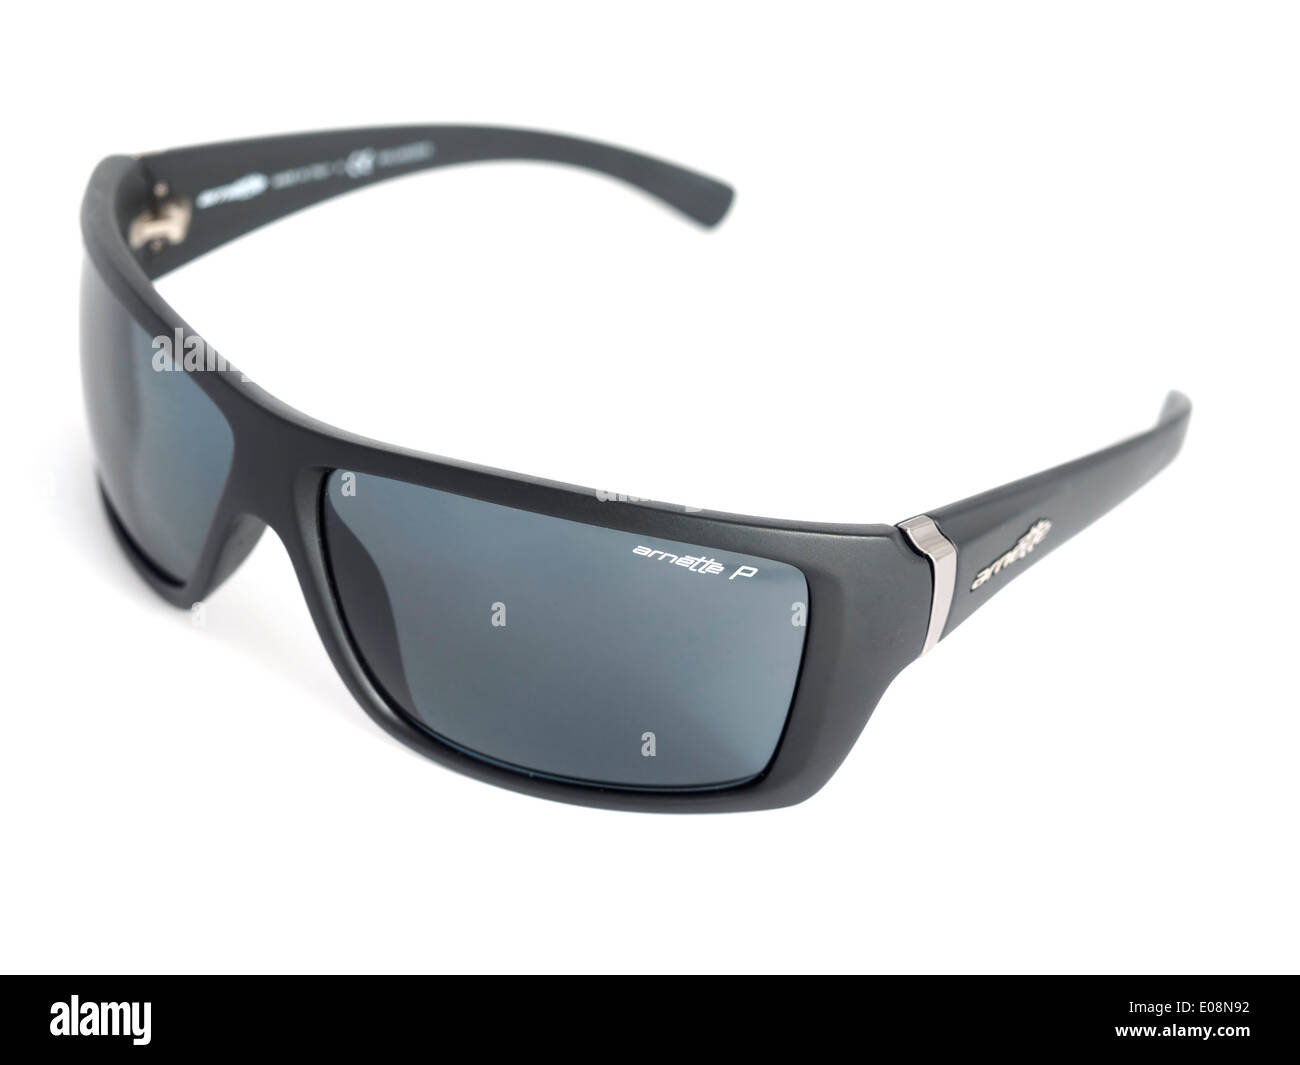 Arnette sunglasses cut out isolated on white background Stock Photo - Alamy